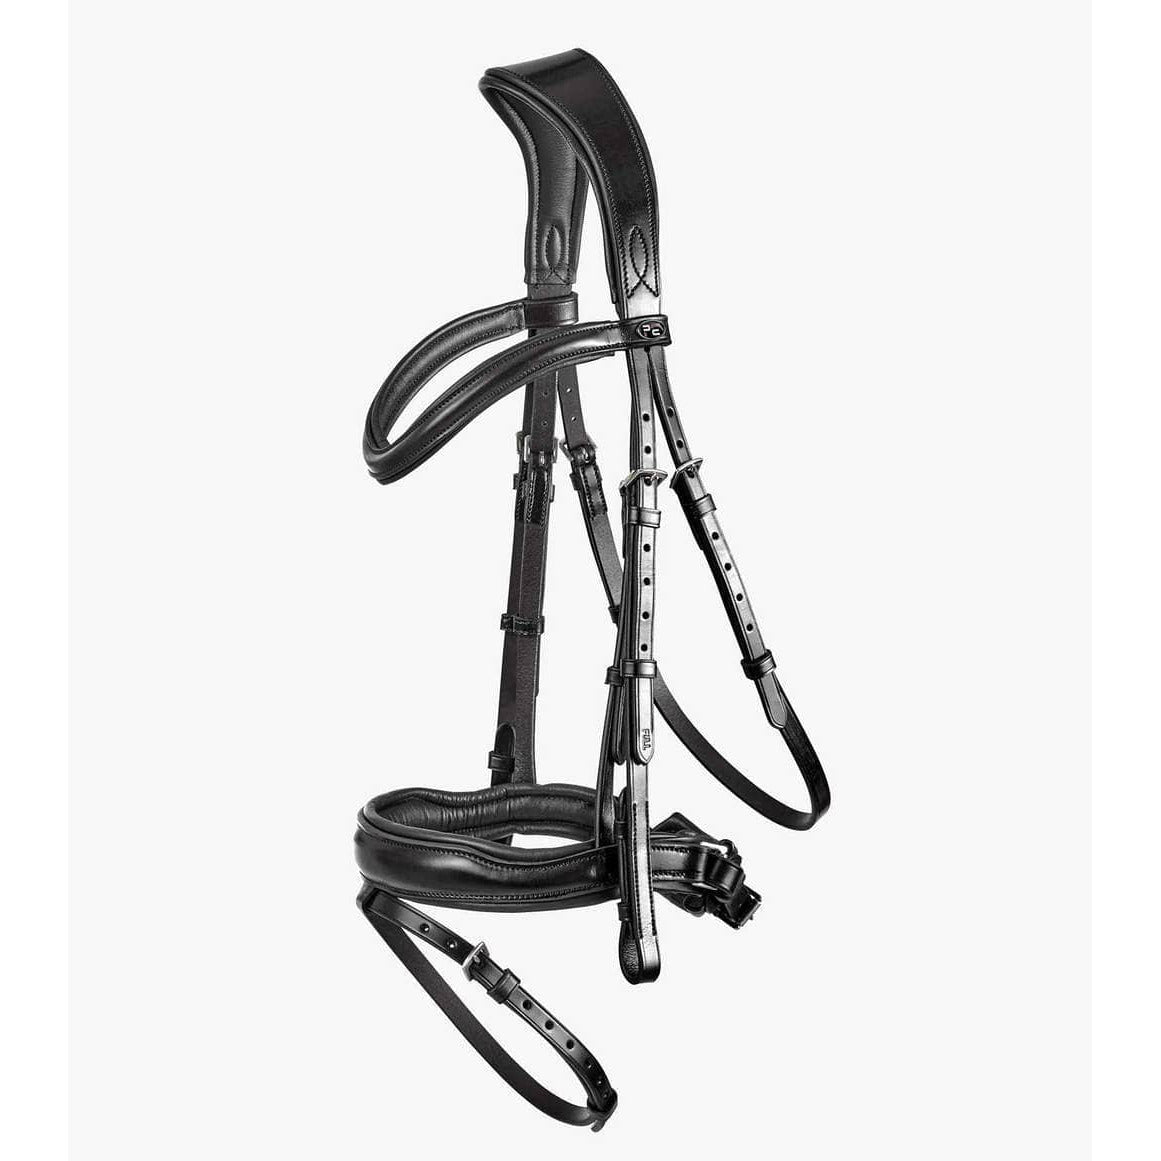 PREMIER EQUINE BRIDLES & STRAPPING BLACK / COB Pei Favoloso Anatomic Snaffle Bridle